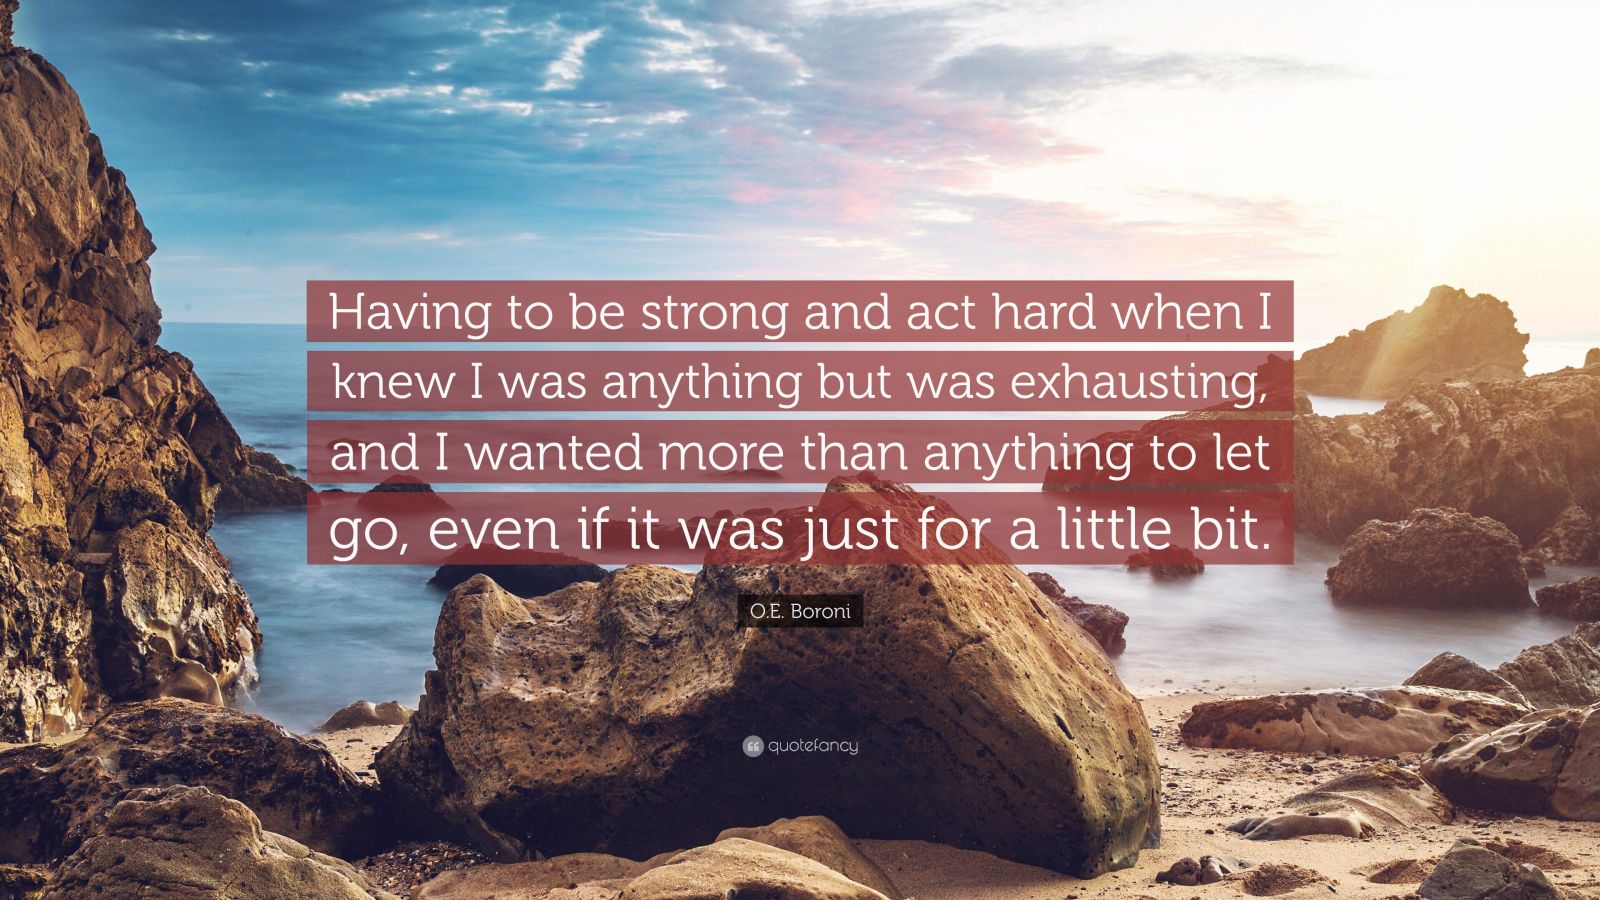 O.E. Boroni Quote: “Having to be strong and act hard when I knew I was  anything but was exhausting